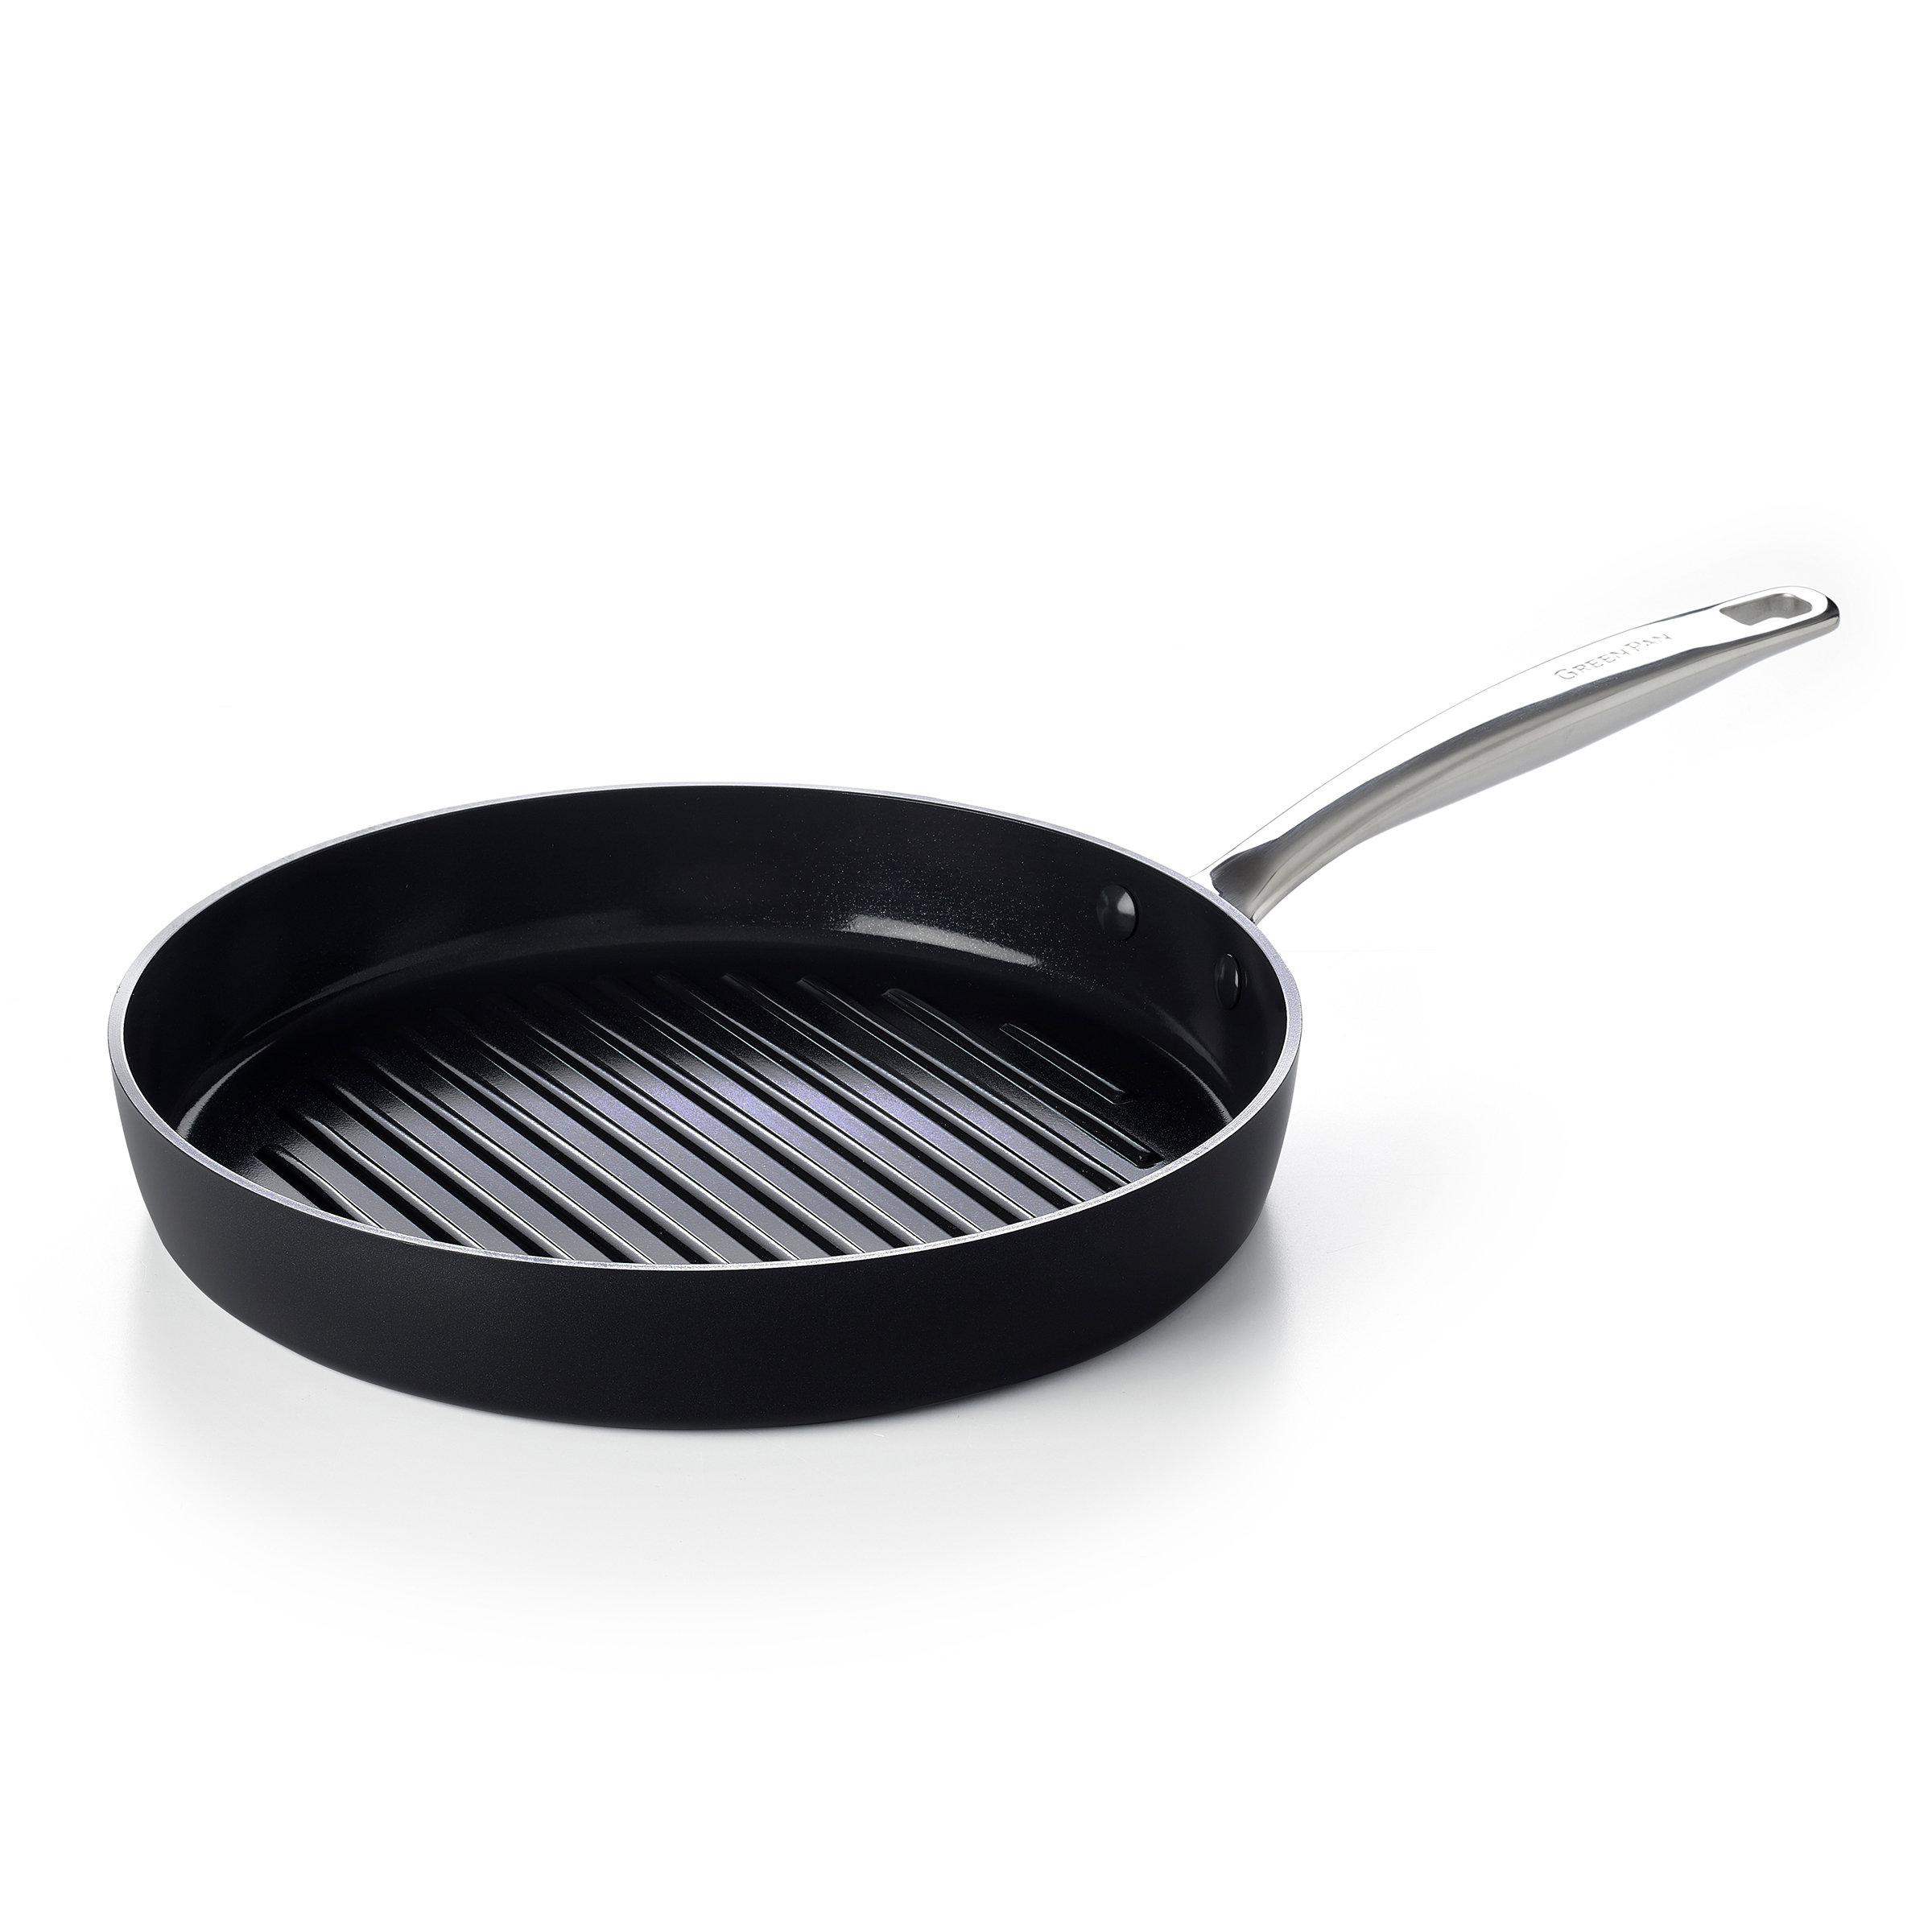 GreenPan Chatham Hard Anodized Healthy Ceramic Nonstick, 11 Griddle Pan,  PFAS-Free, Dishwasher Safe, Oven Safe, Gray